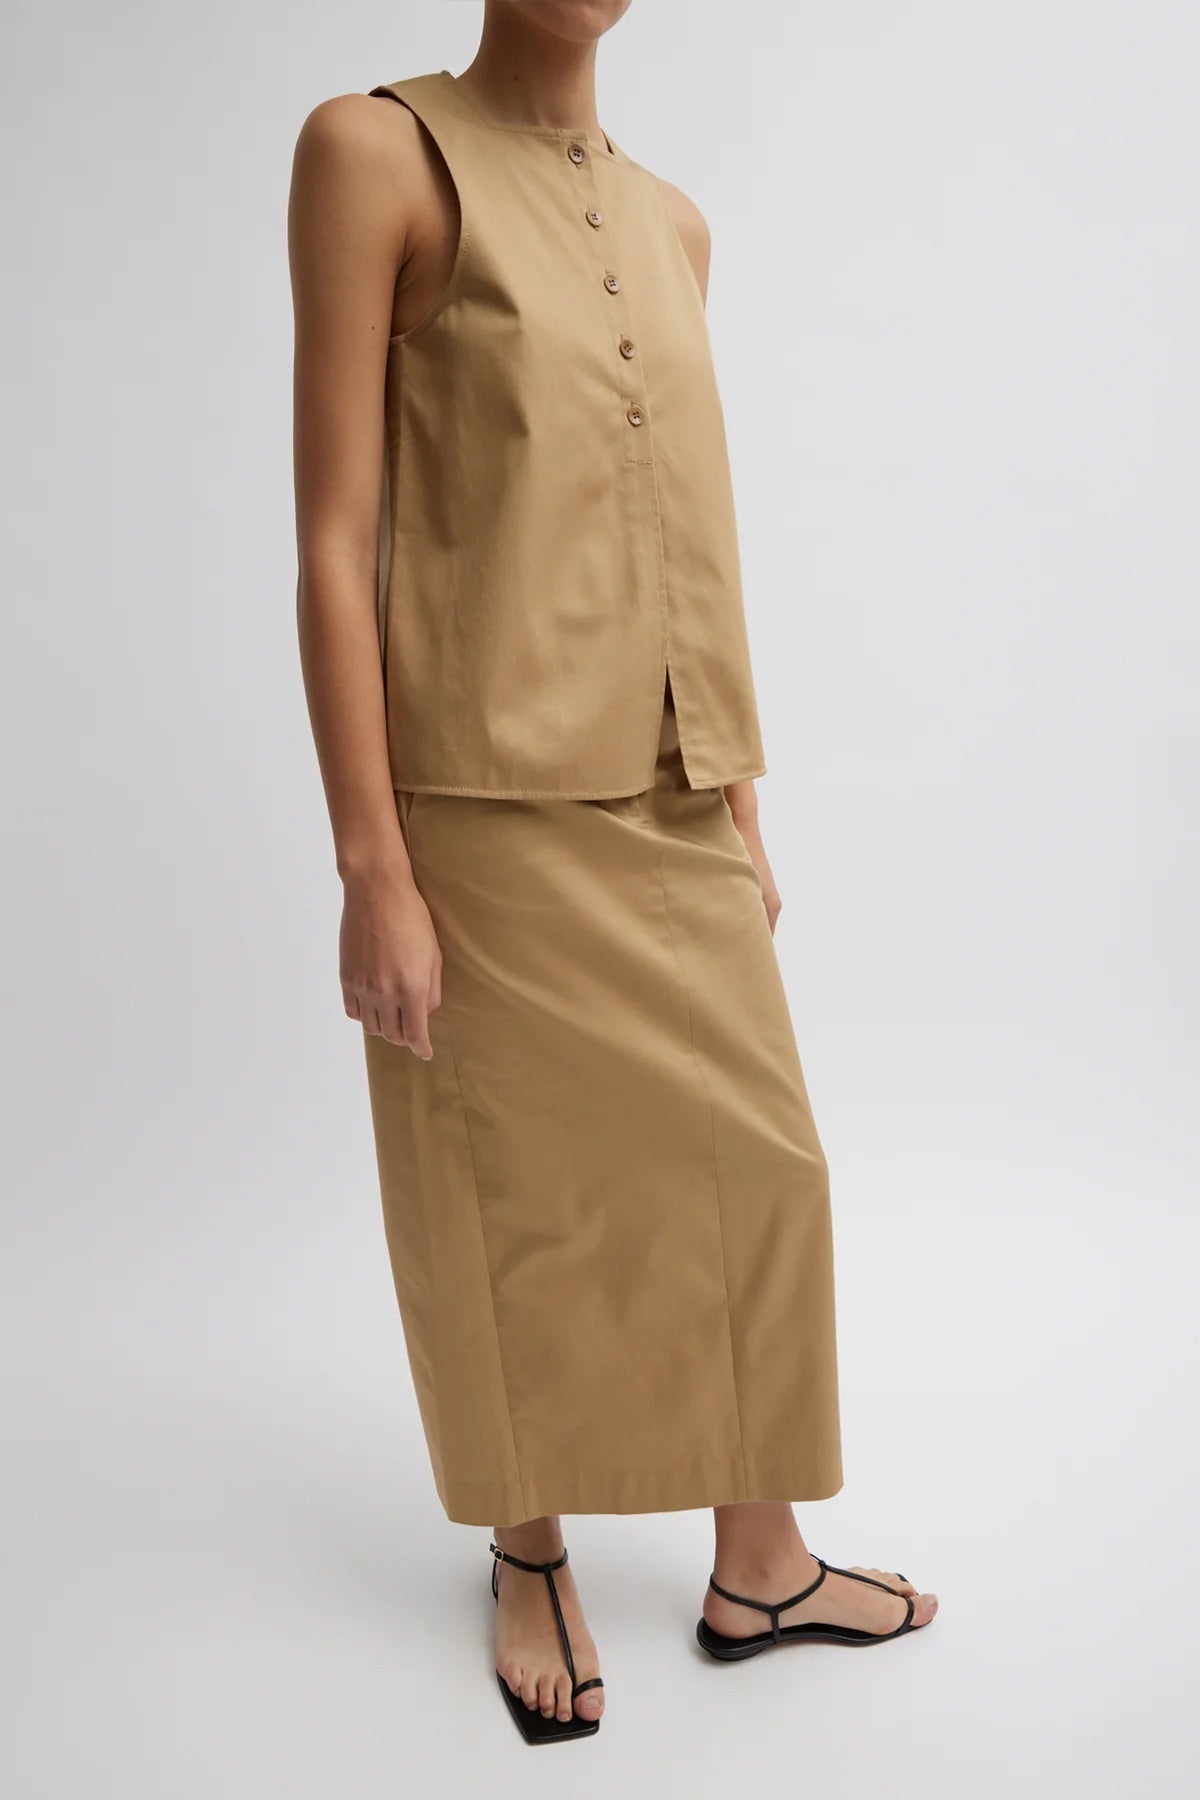 Chino Slit Front Sleeveless Top in Tan - shop-olivia.com